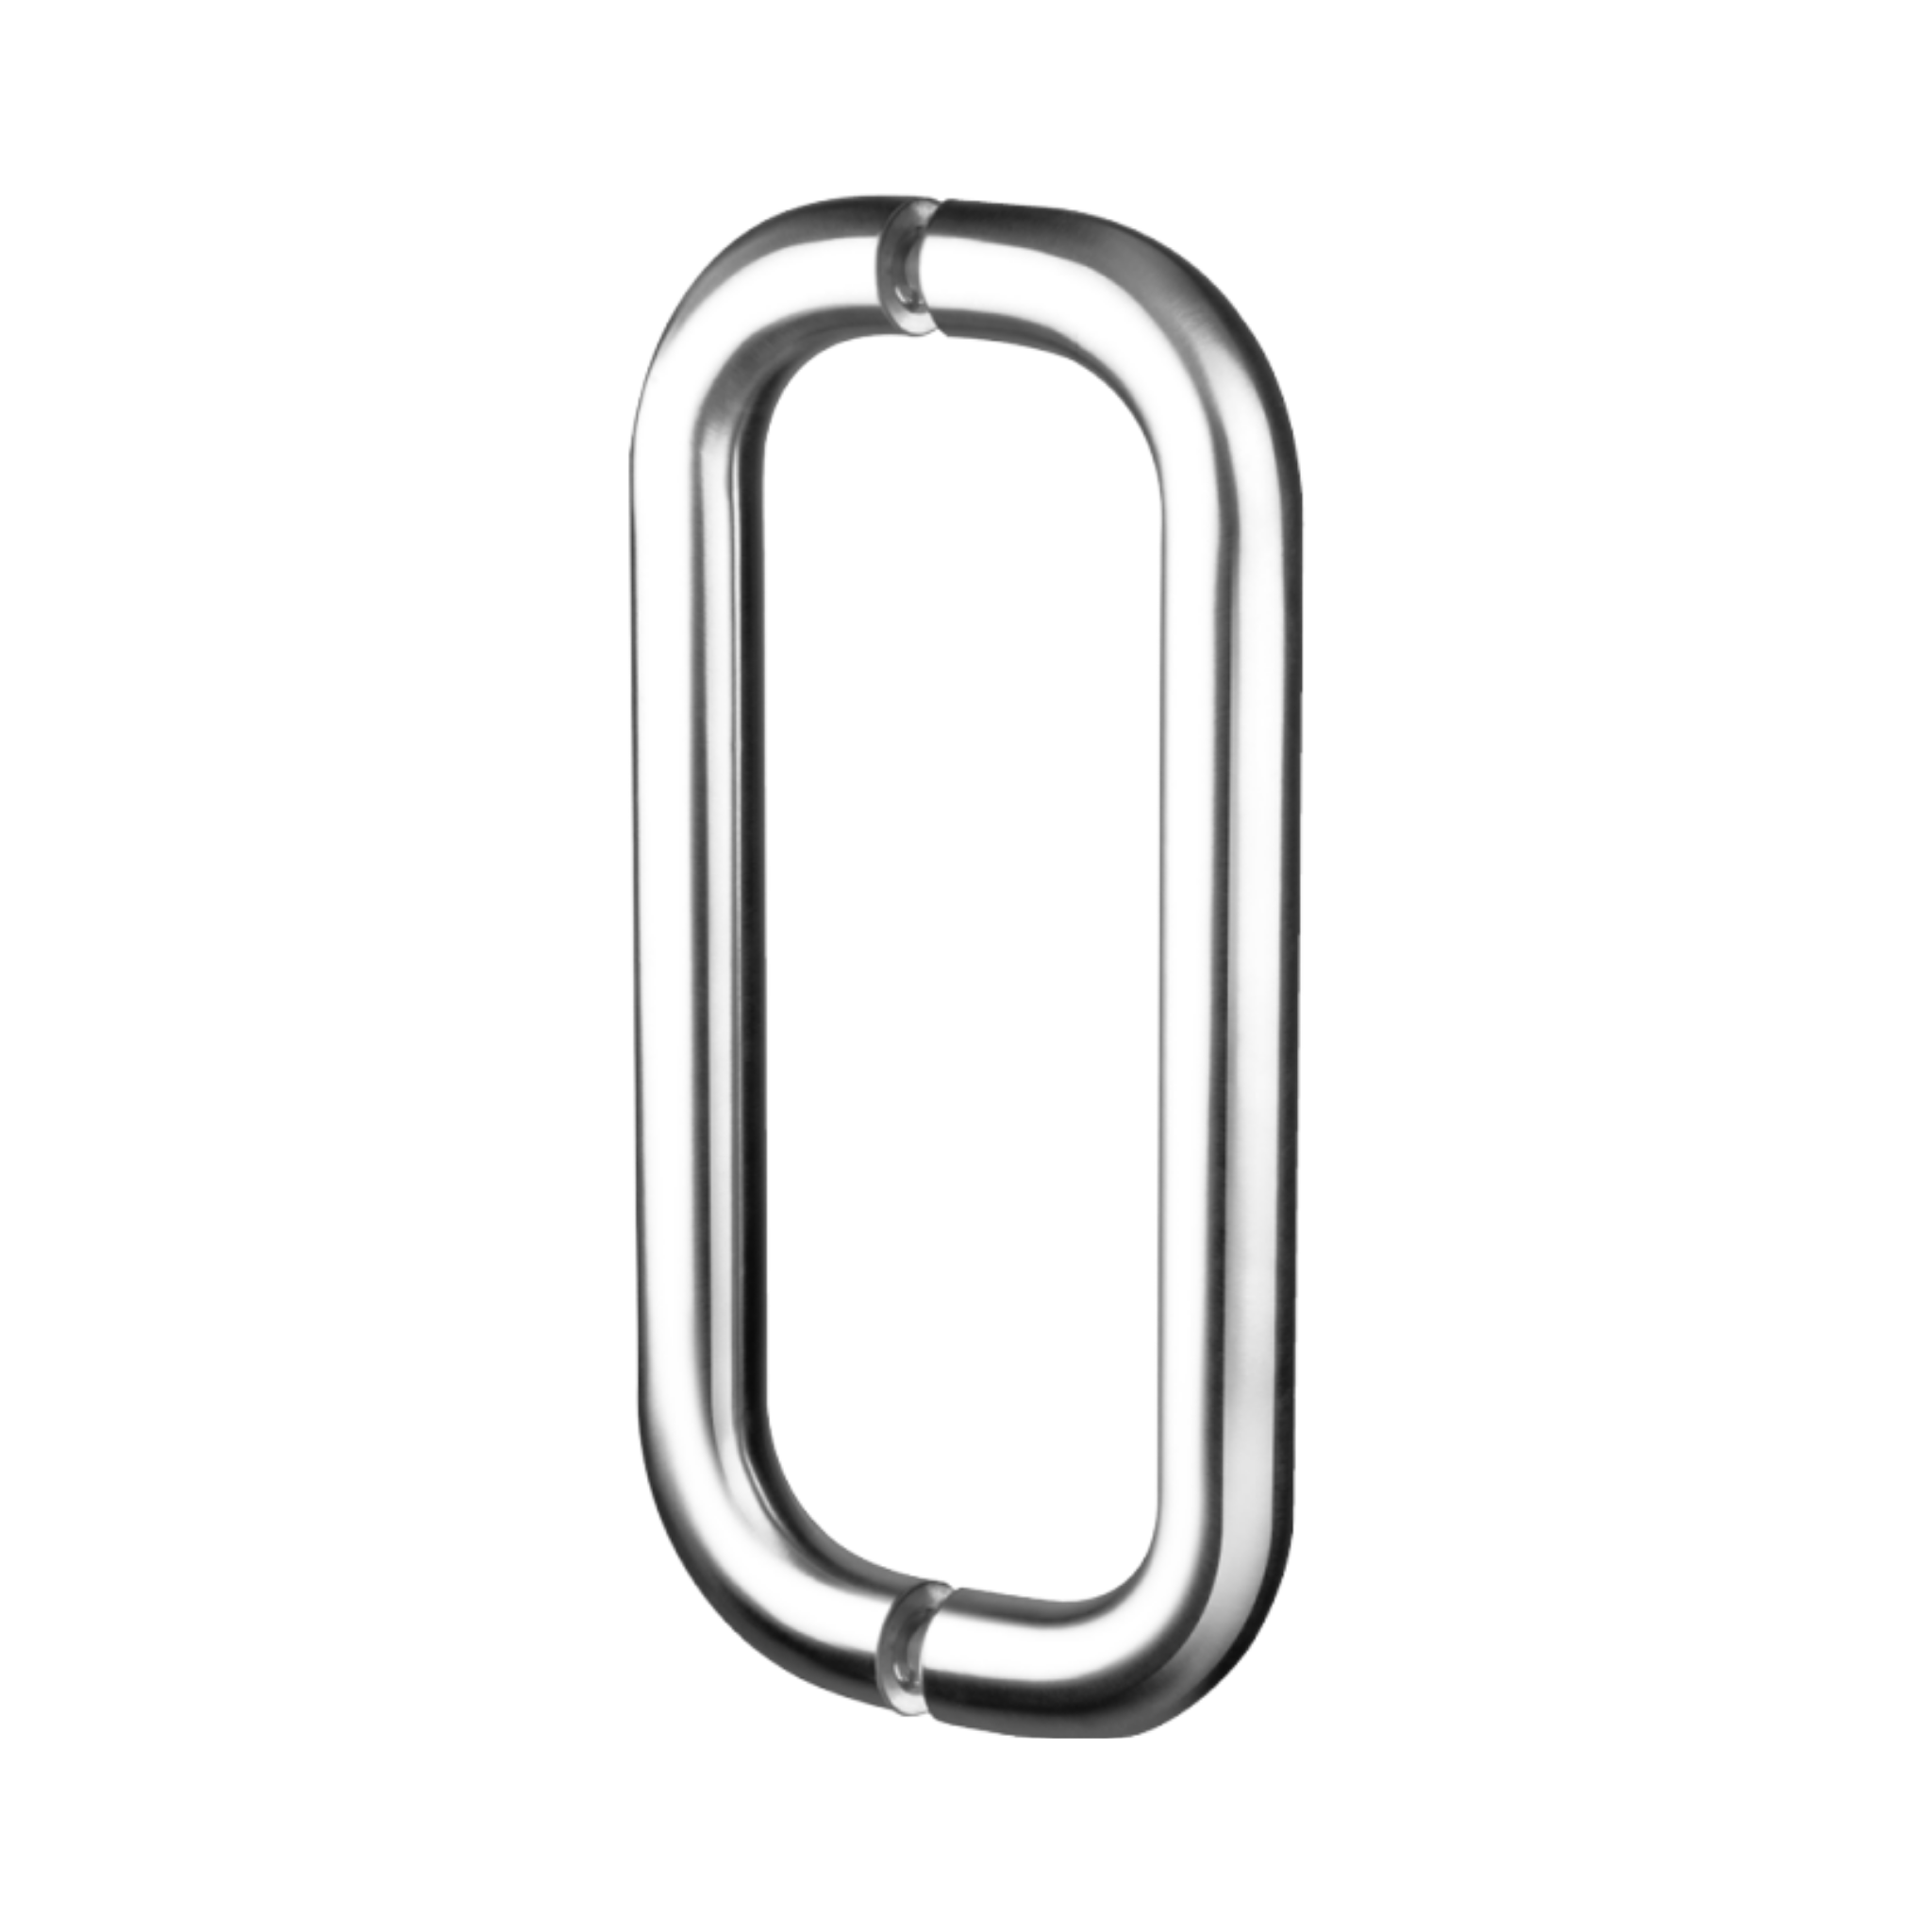 QS2201/1 D Handle, Pull Handle, Round, D Handle, BTB, 30mm (Ø) x 330mm (l) x 300mm (ctc), Stainless Steel, QS